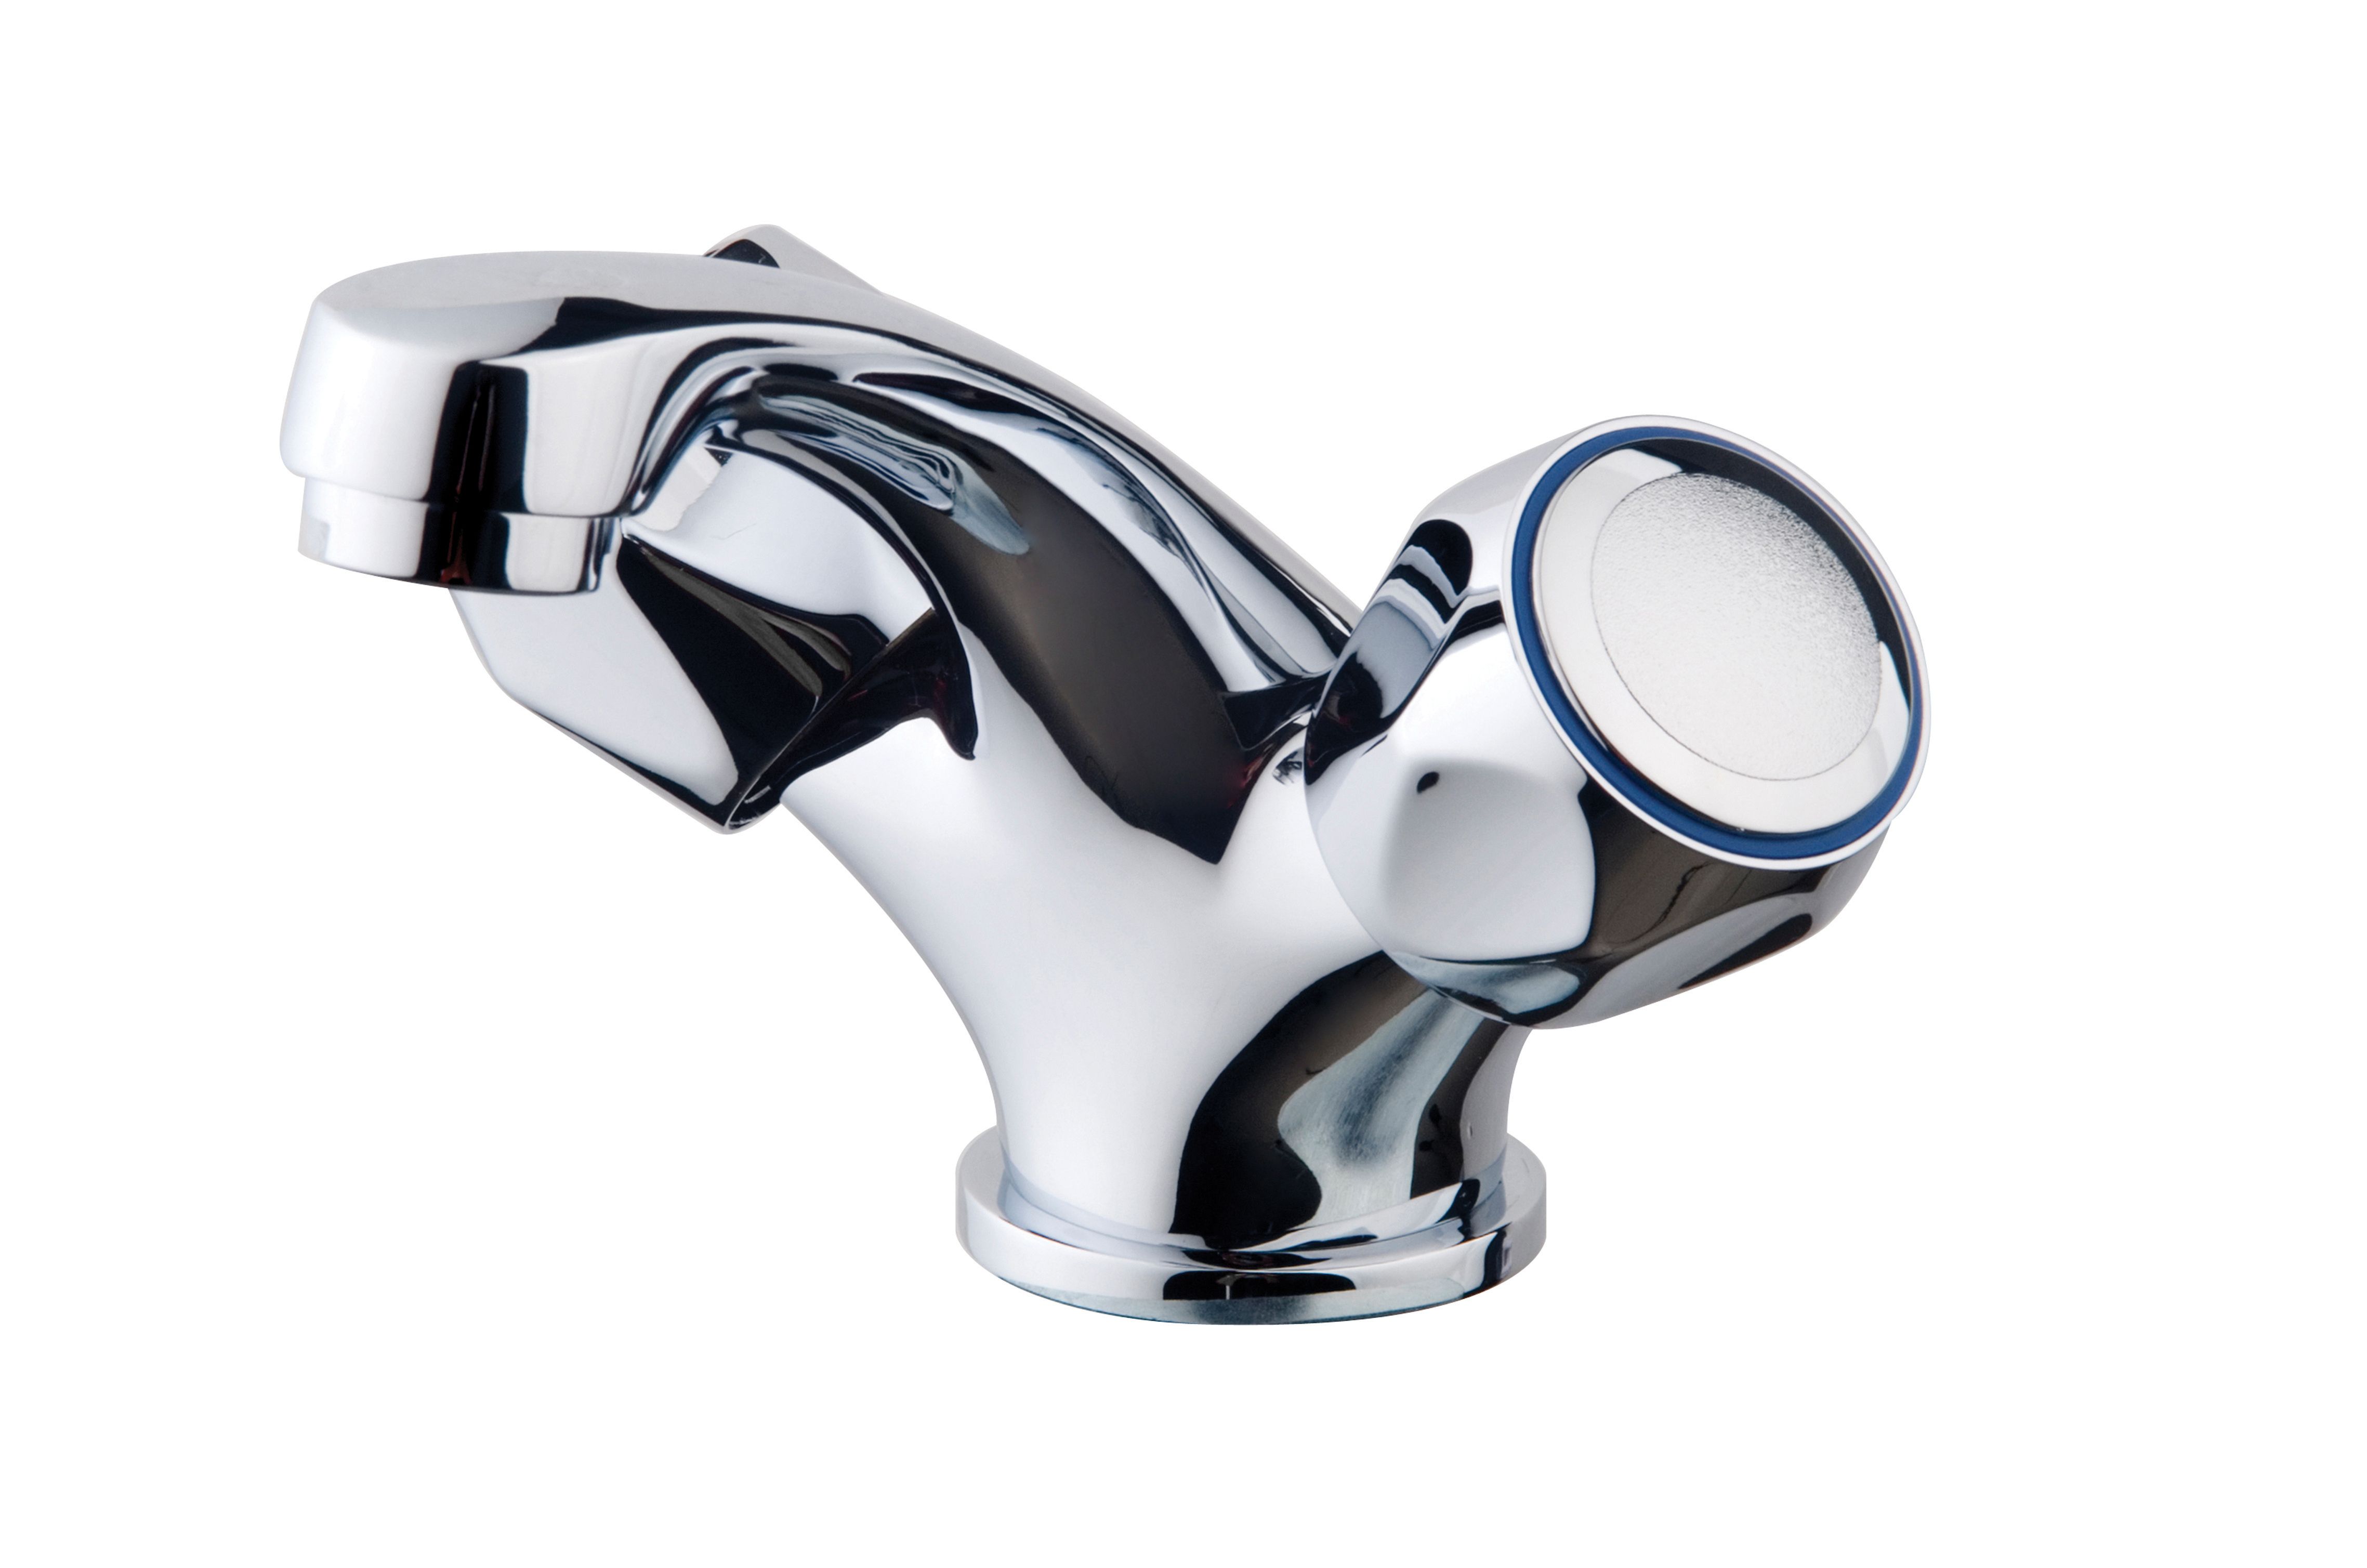 Image of Wickes Trade Chrome Basin Mixer Tap